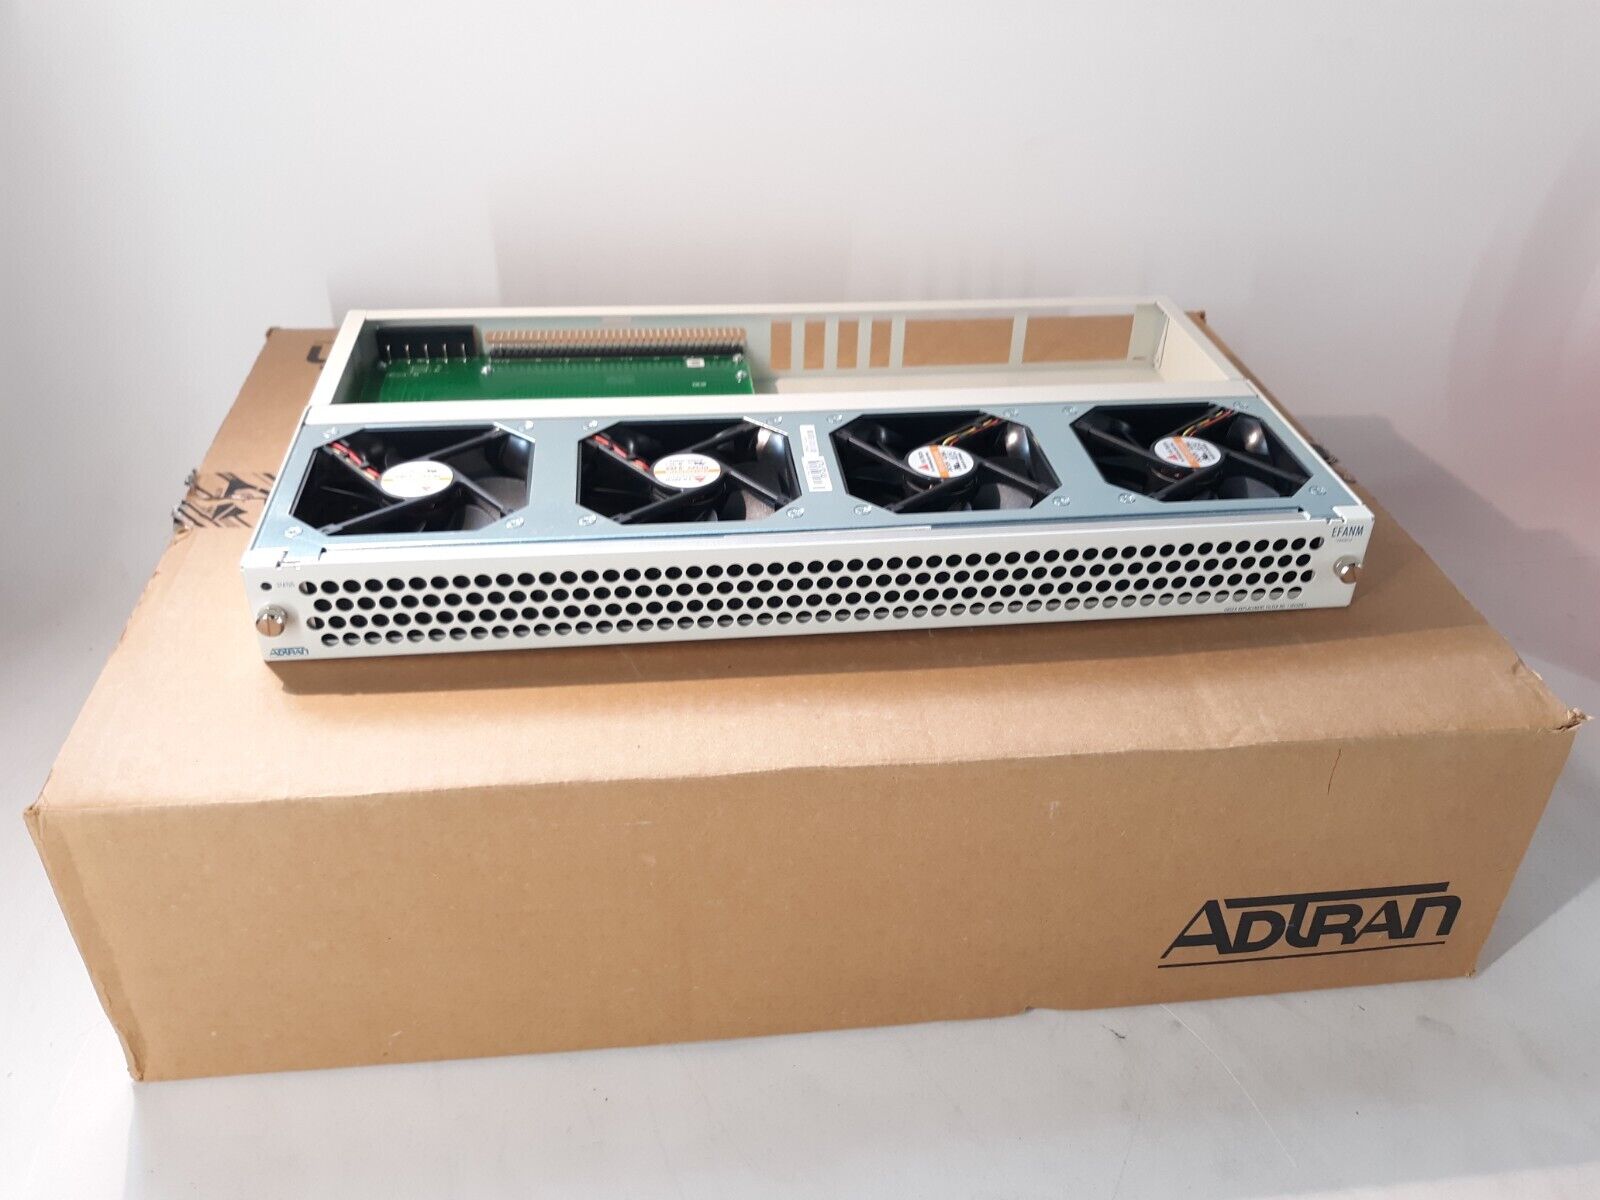 Adtran OPTI-6100 EFANM Assembly 1184507L2 w/ Ears and Hardware